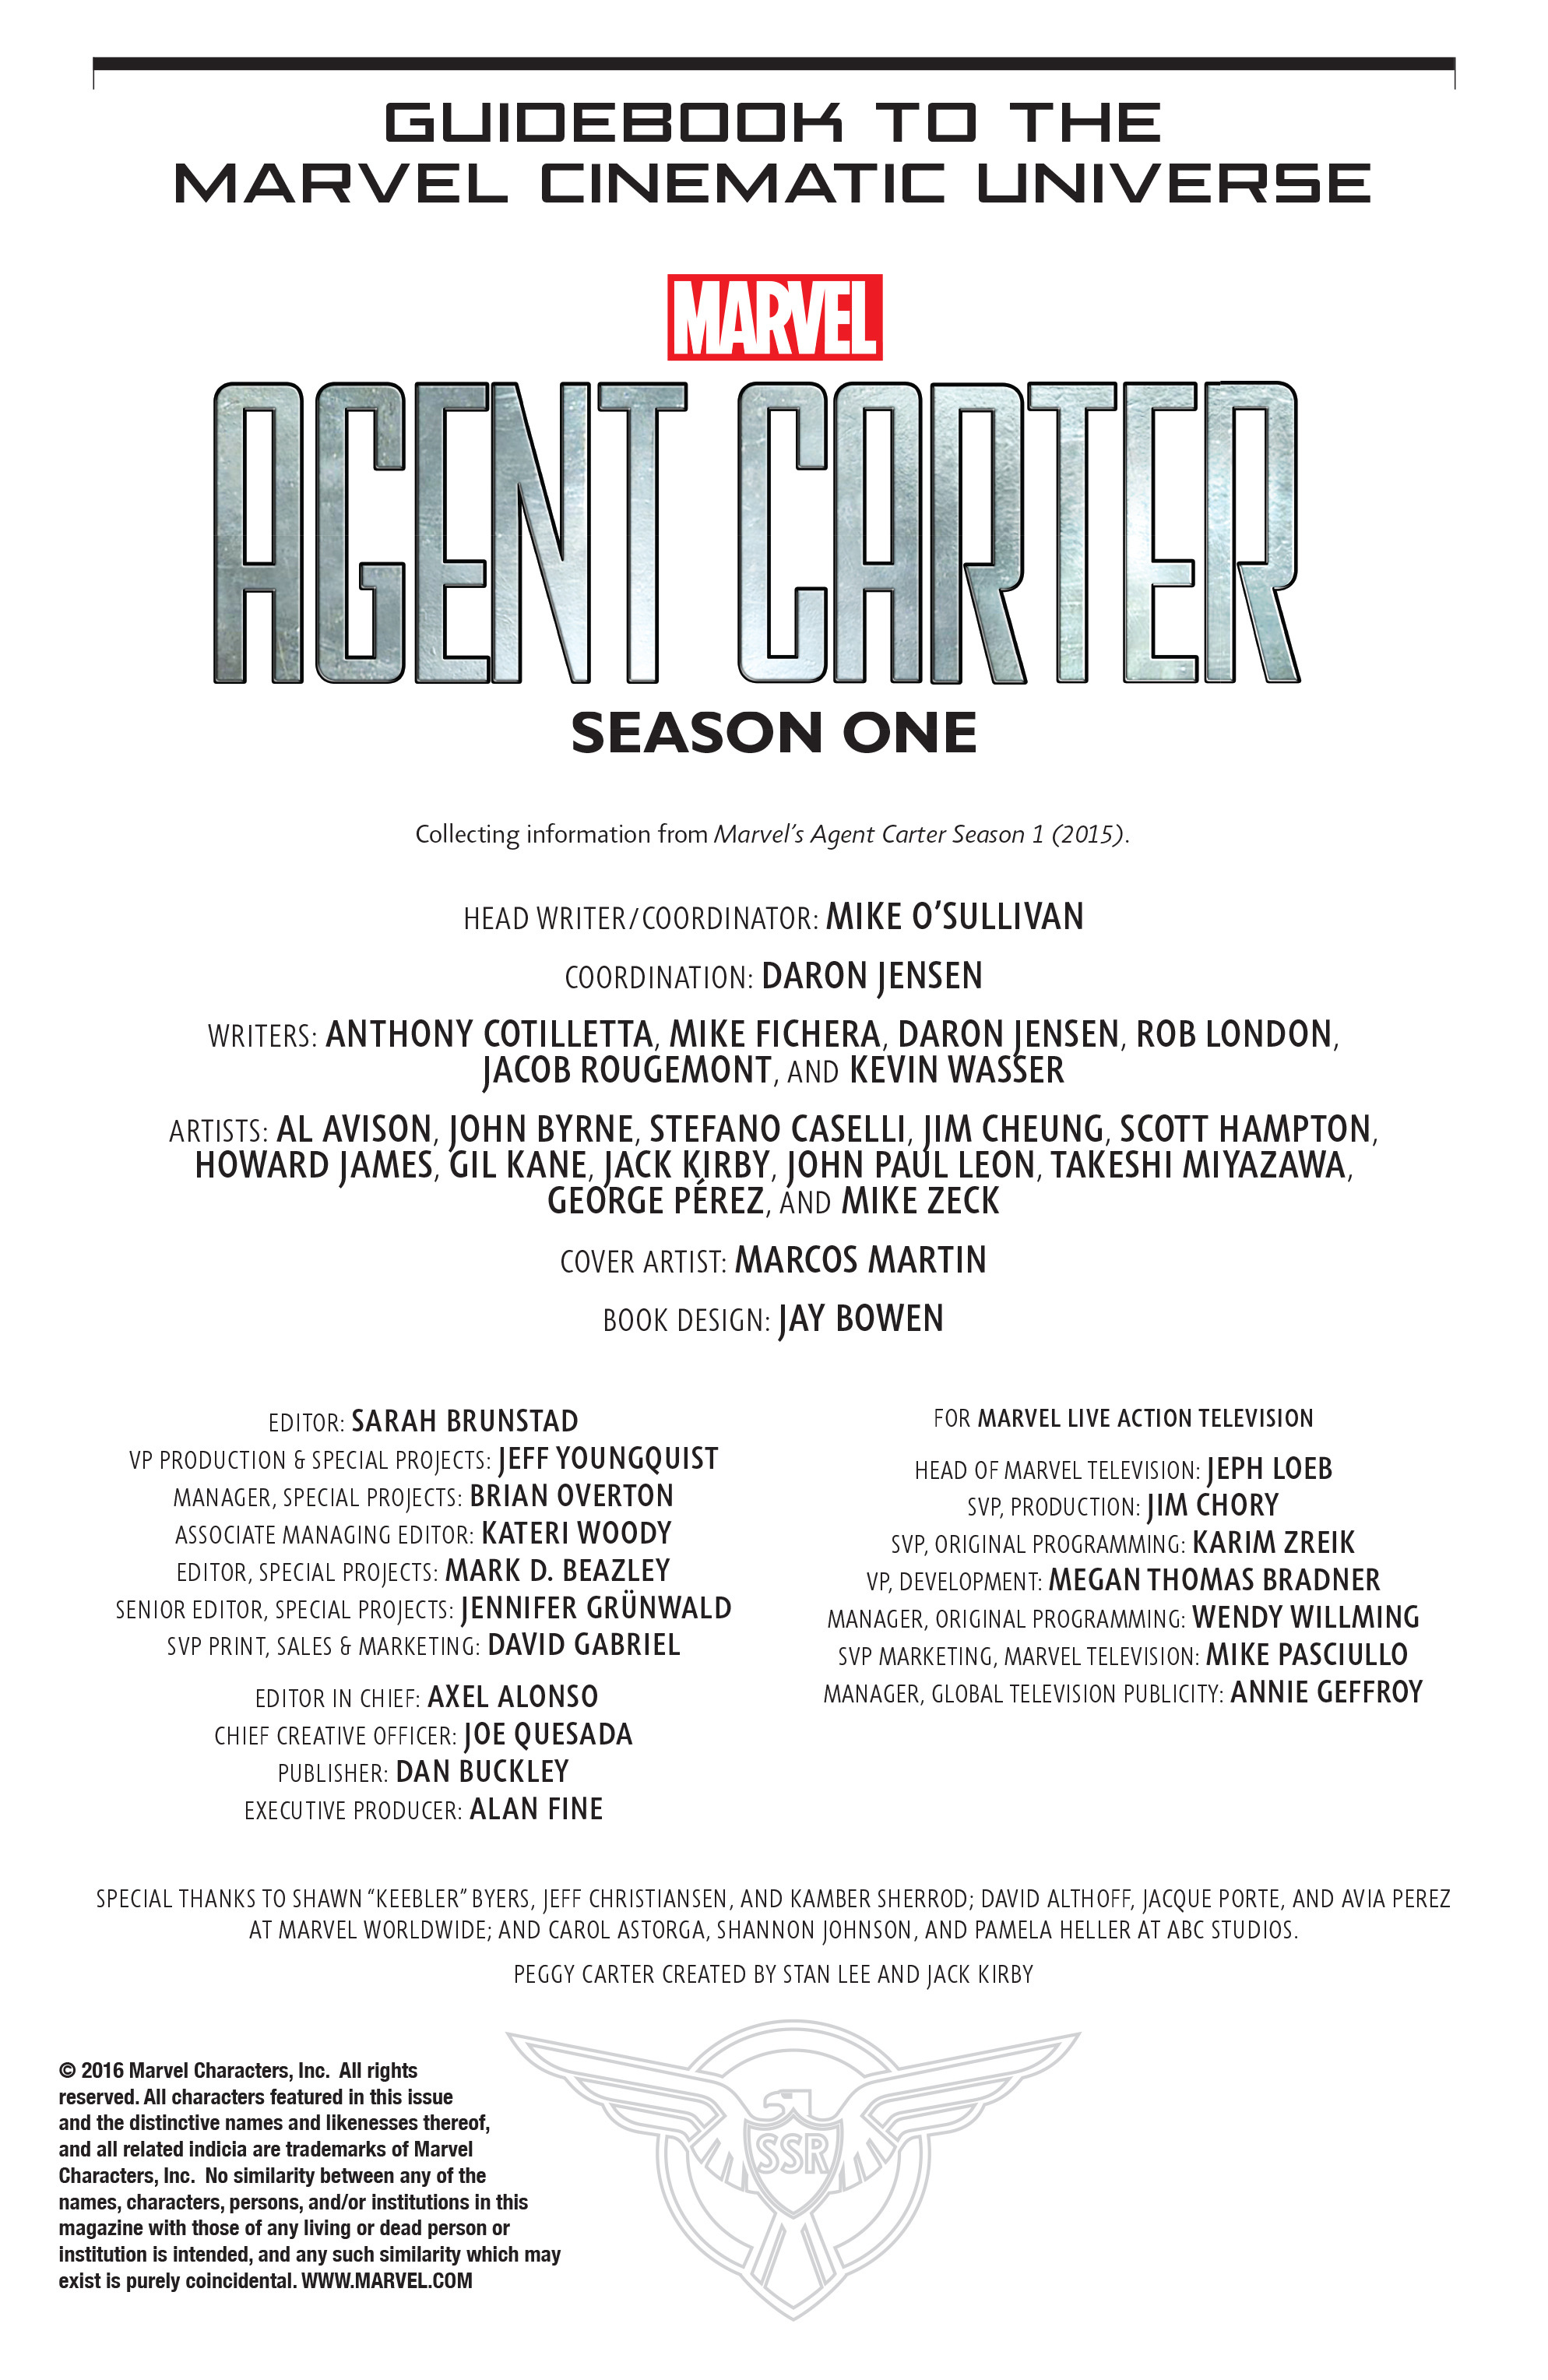 Read online Guidebook to the Marvel Cinematic Universe - Marvel's Agent Carter Season One comic -  Issue # Full - 2